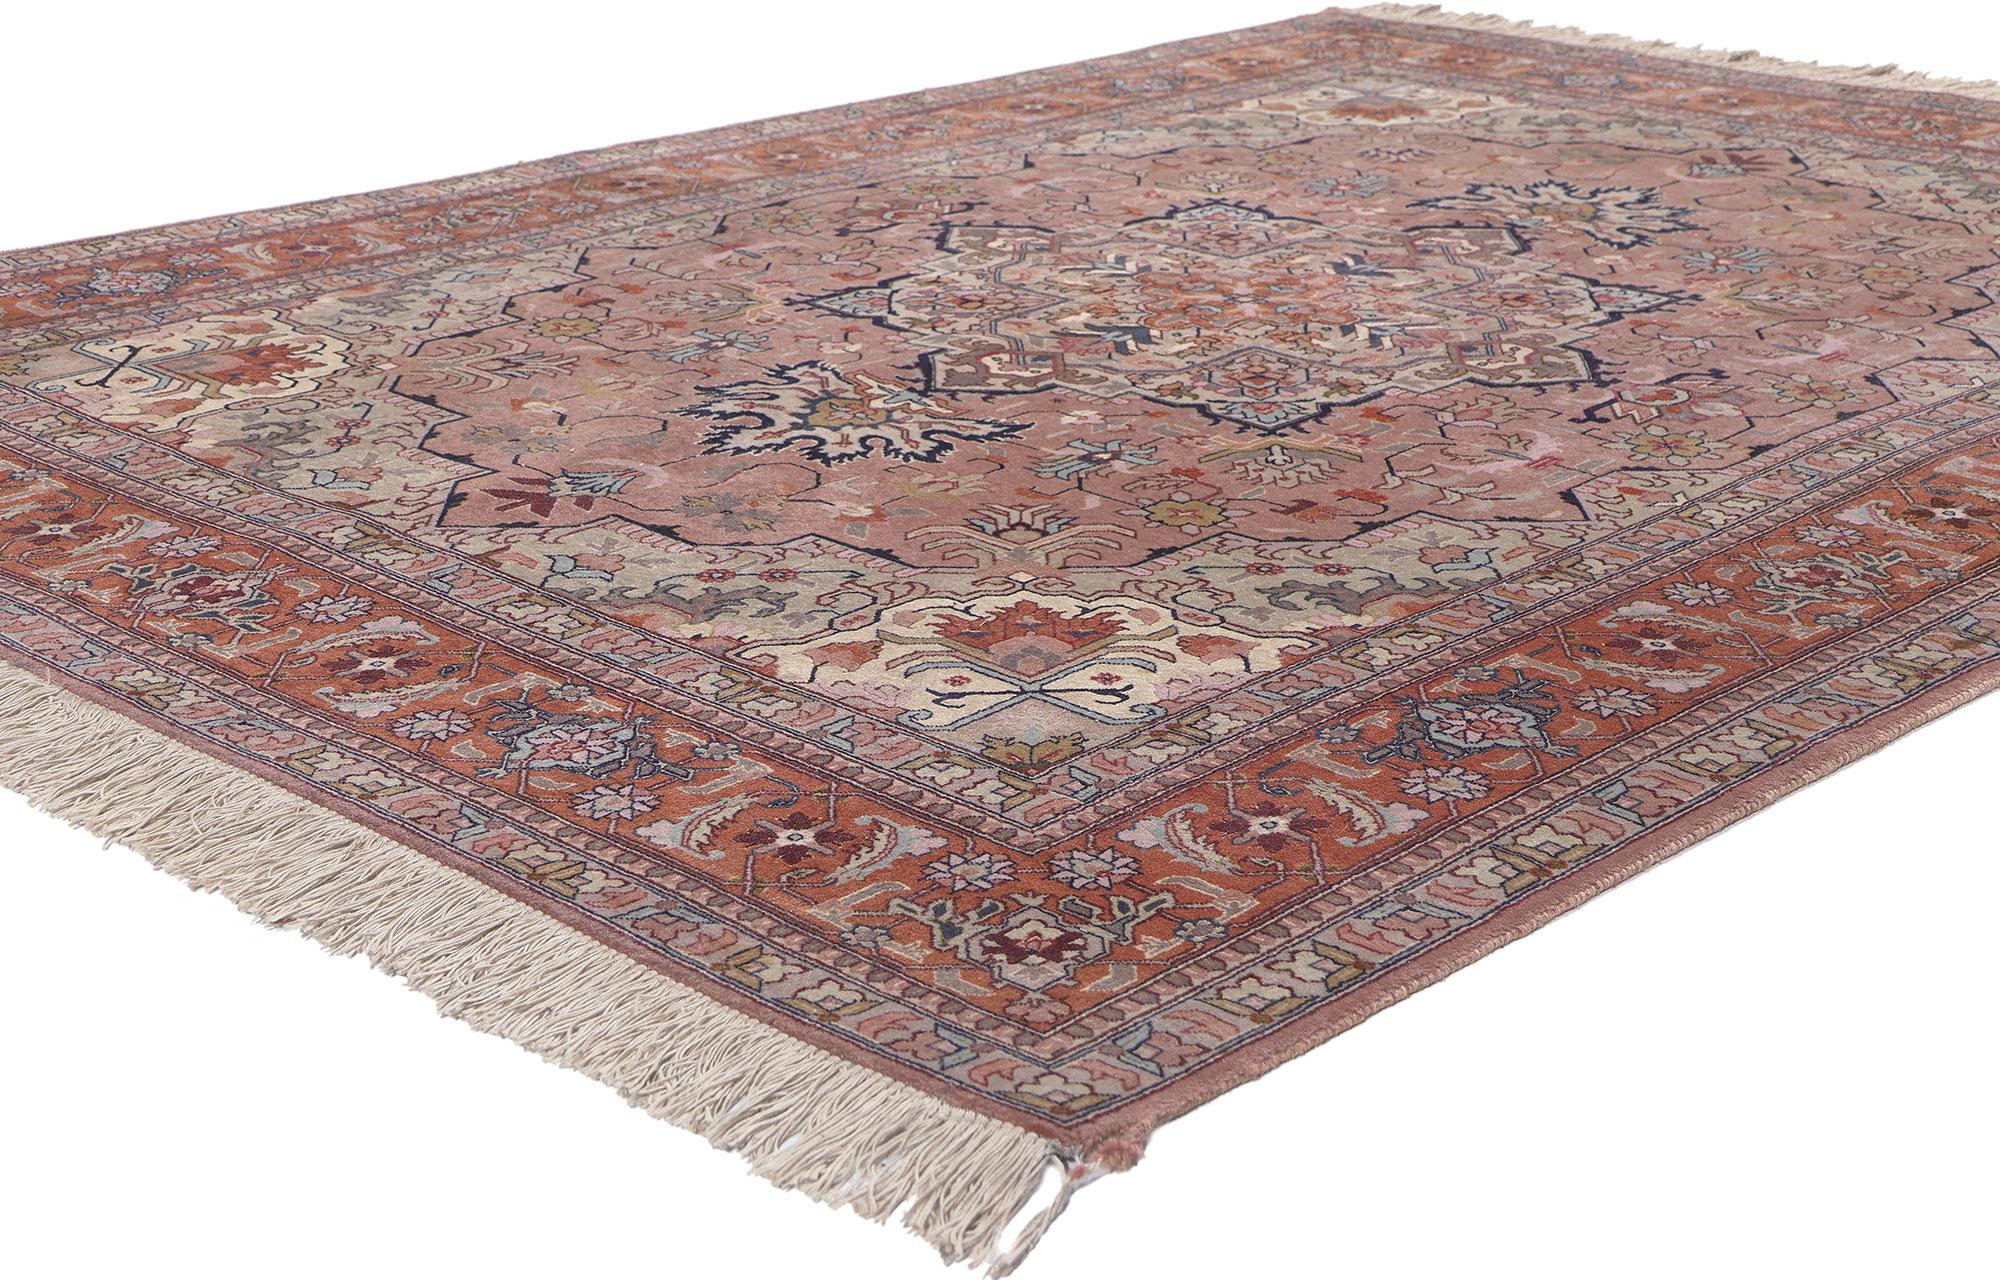 78686 Vintage Persian Tabriz Rug, 04'10 x 06'05. Regencycore seamlessly merges with timeless elegance in this meticulously hand-knotted wool vintage Persian Tabriz rug. The enchanting botanical design and harmonious color palette intricately woven